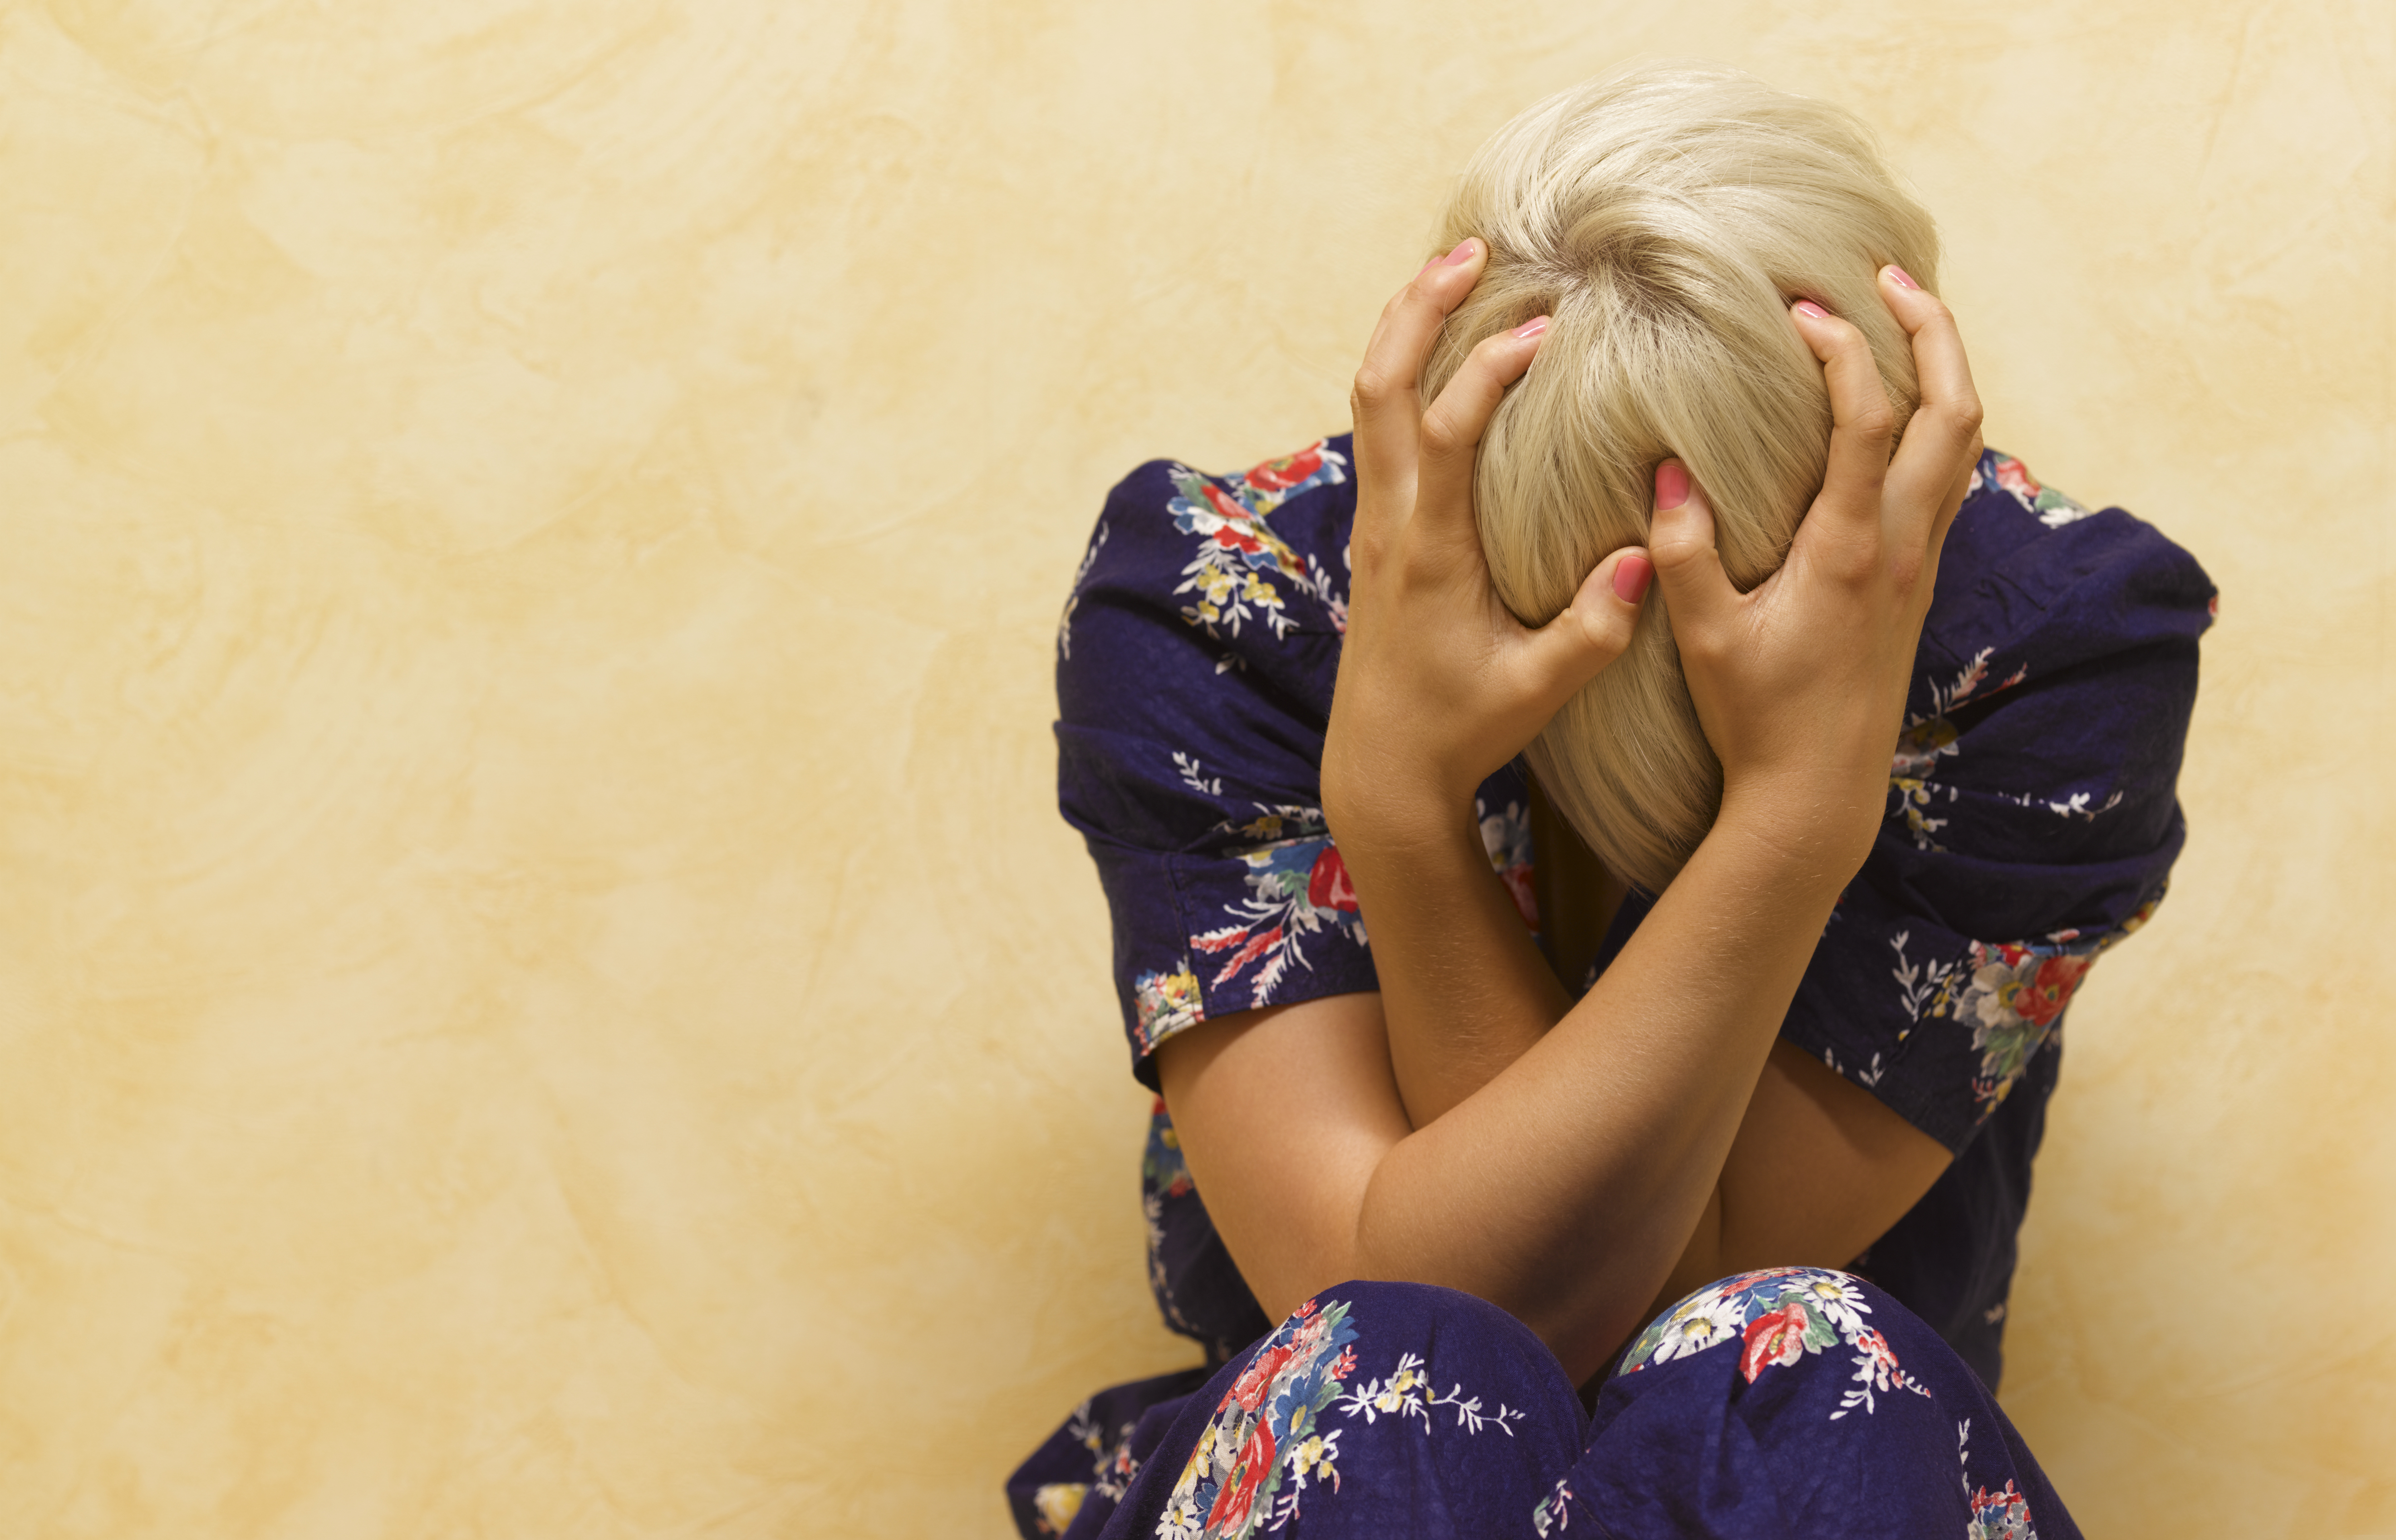 Woman clutching her head in mental anguish | Source: Getty Images